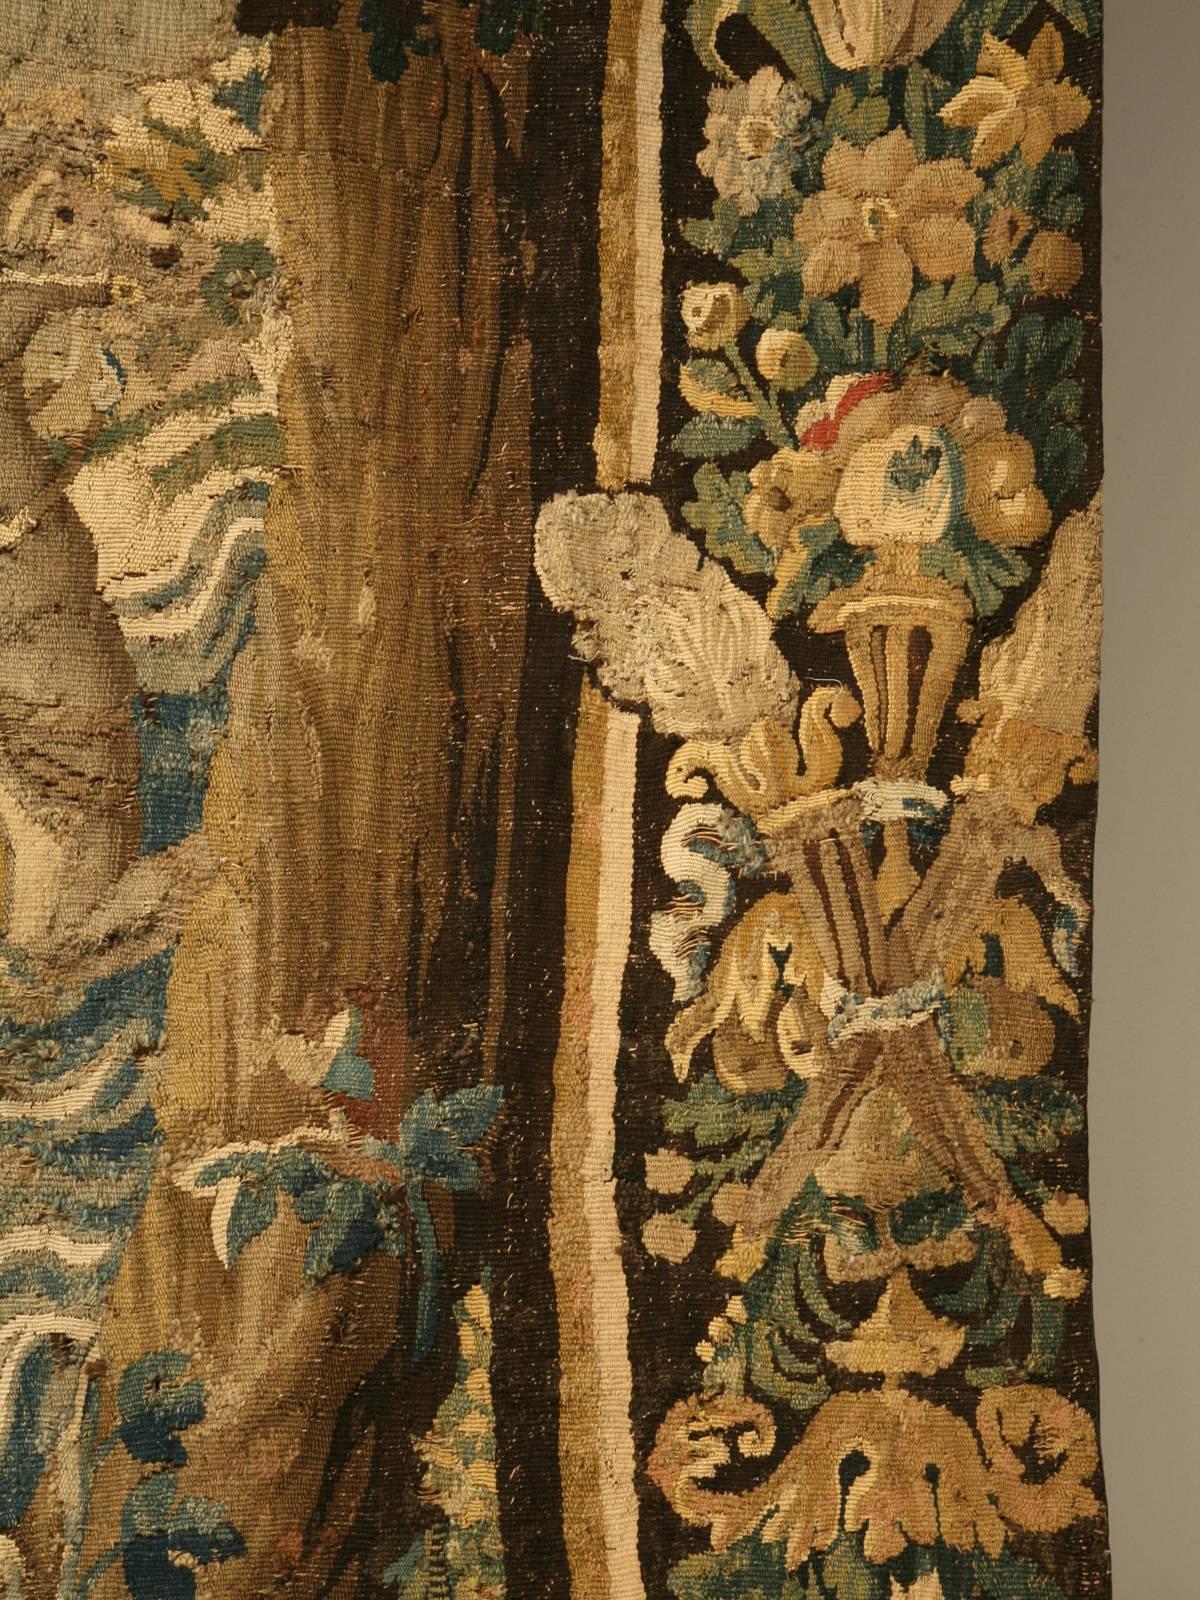 This tapestry was woven in Aubusson, France circa 1650s and is documented. It has its original floral border and beautiful verdure and classical motifs. There are many condition issues and it has had more than its share of repairs. We actually drove